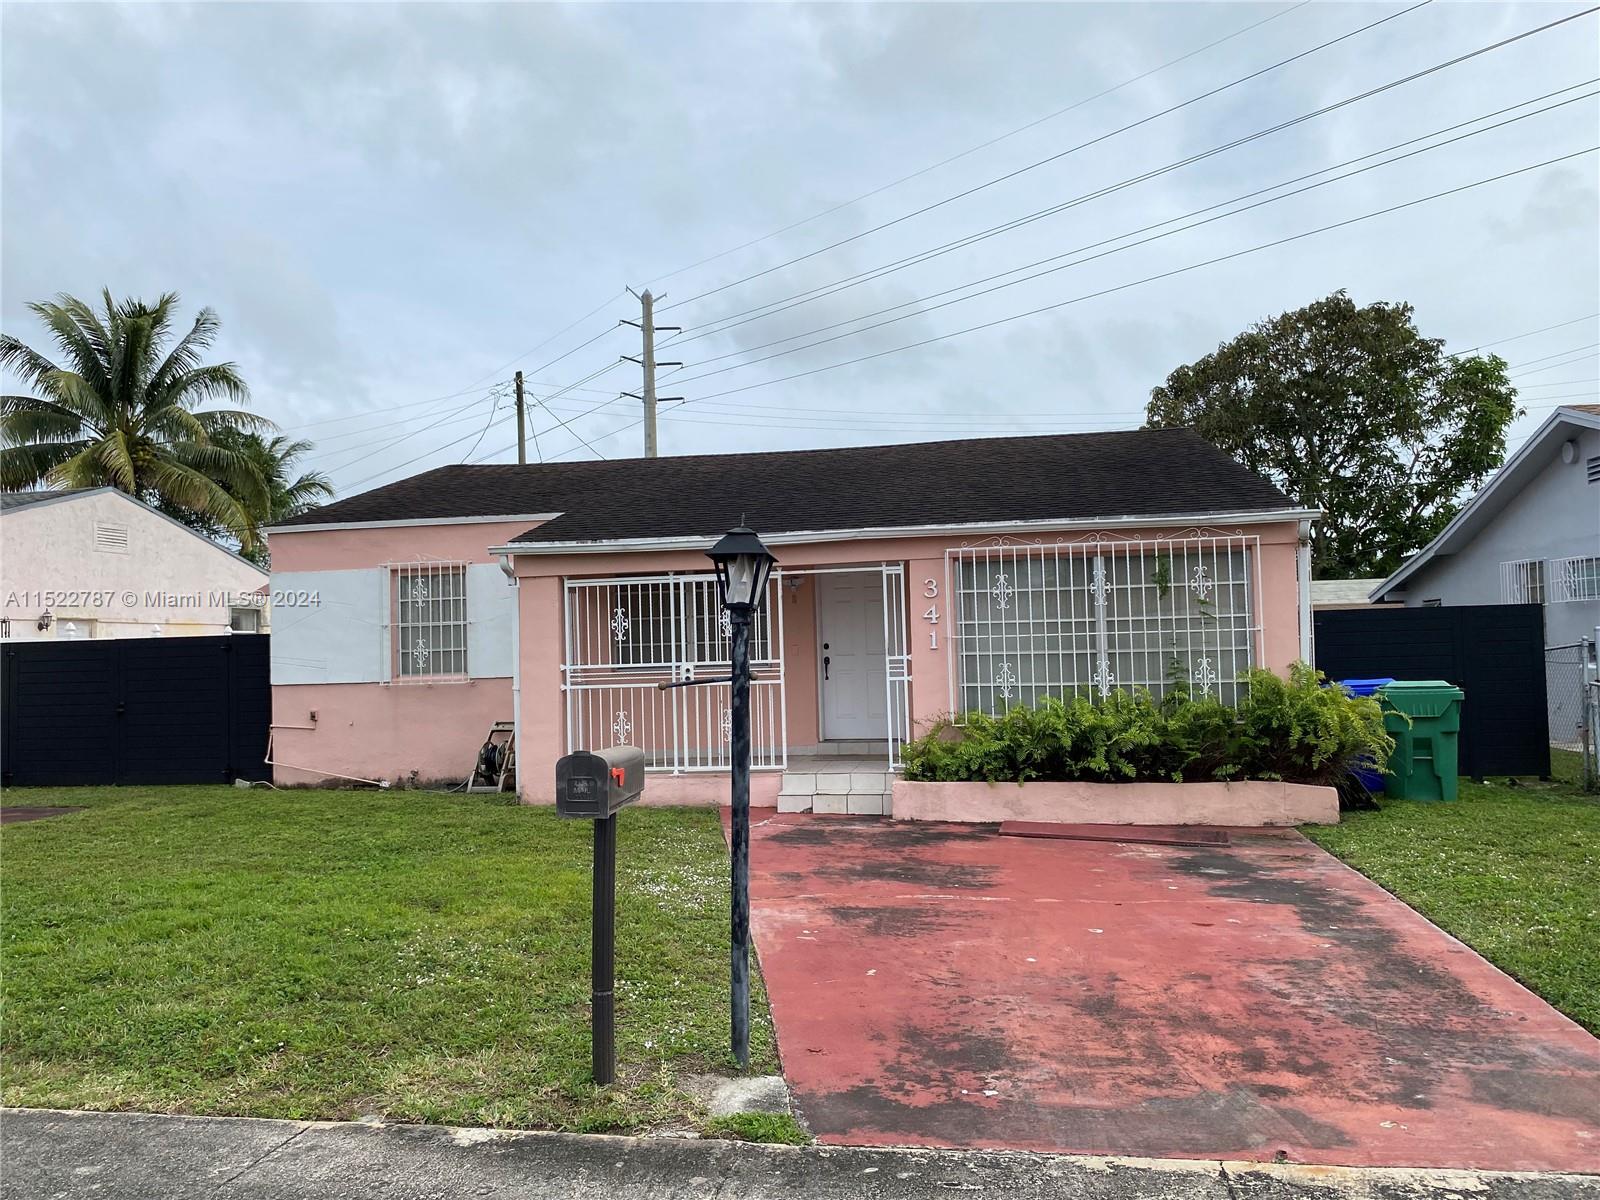 Undisclosed For Sale A11522787, FL